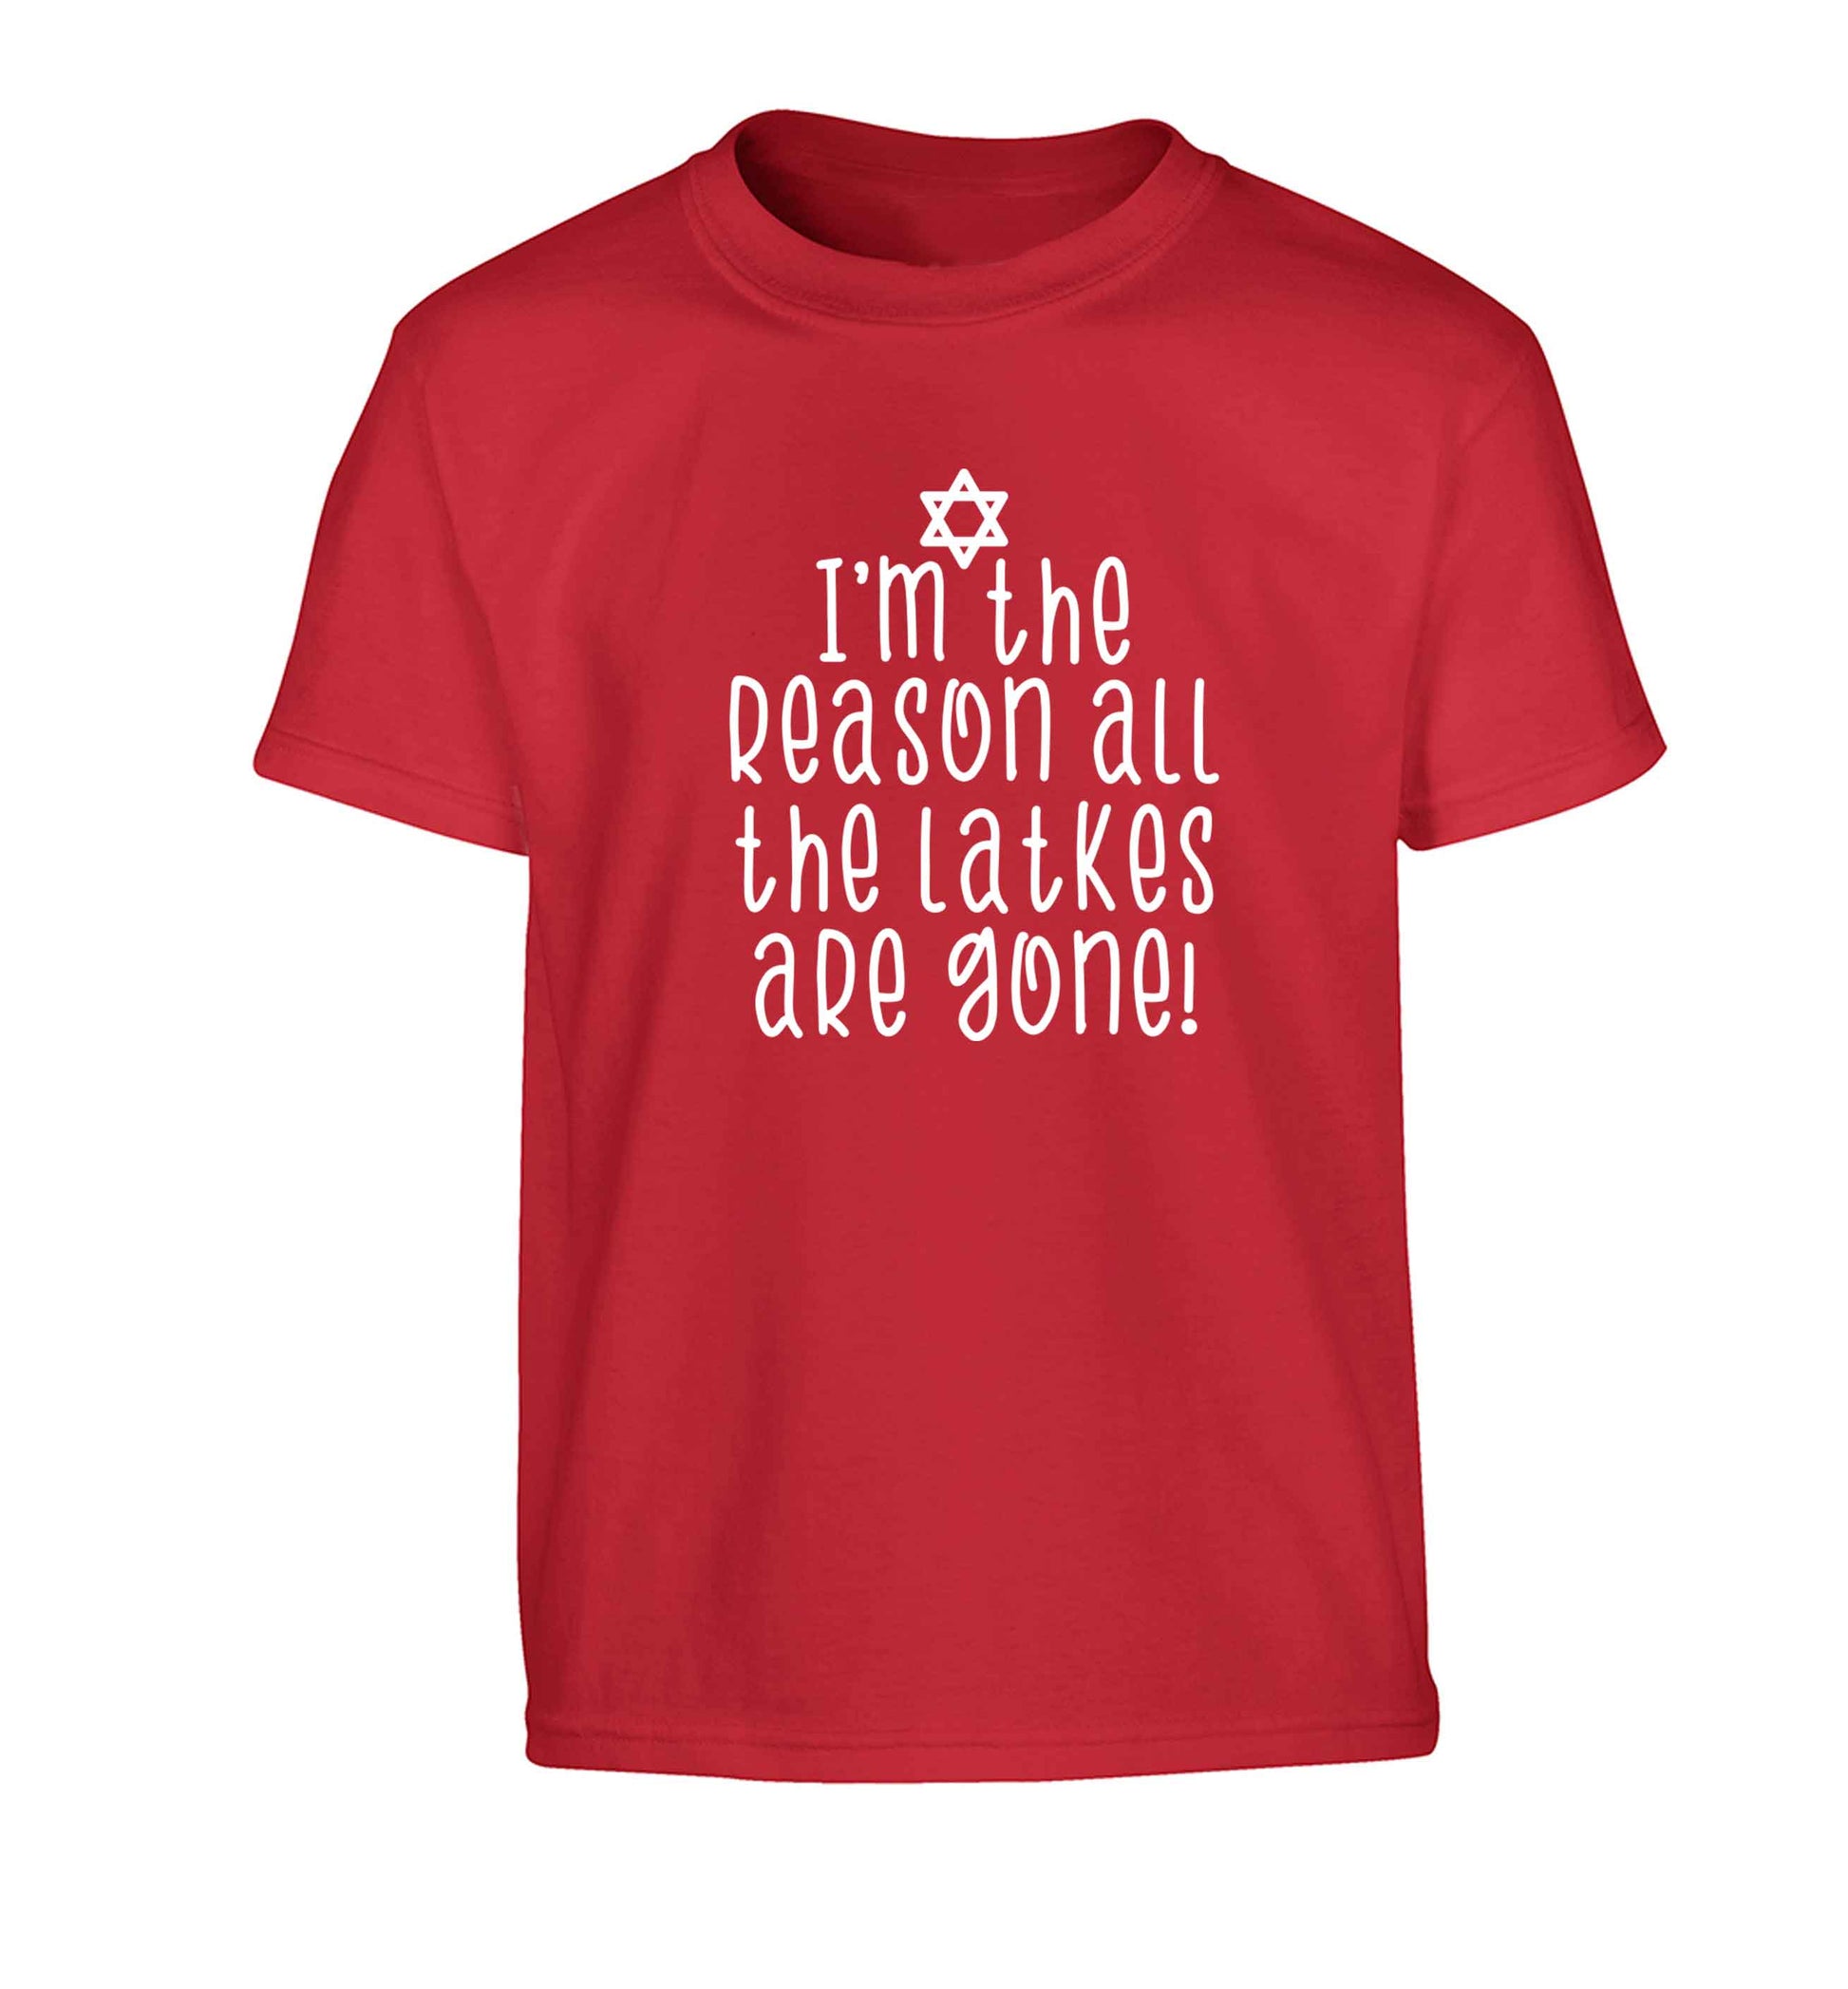 I'm the reason all the latkes are gone Children's red Tshirt 12-13 Years